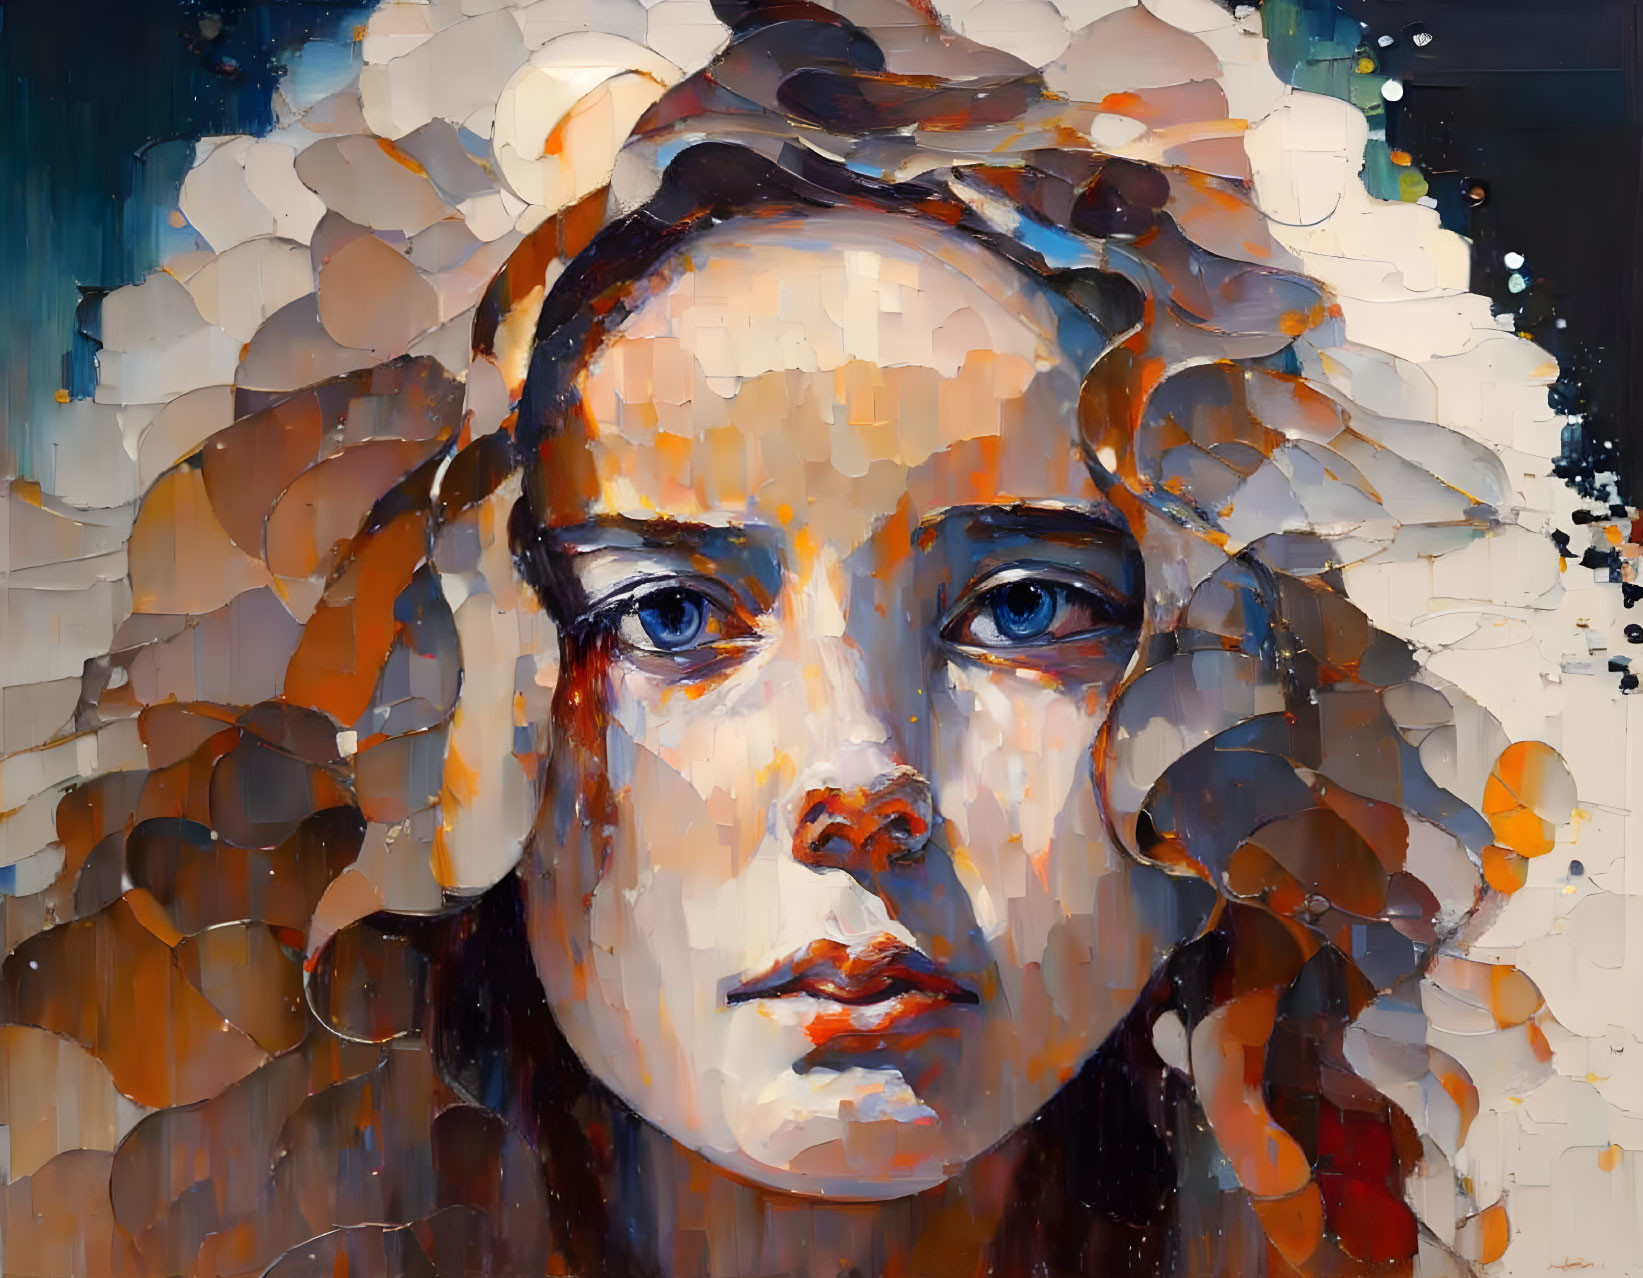 Vibrant mosaic background with woman's expressive gaze